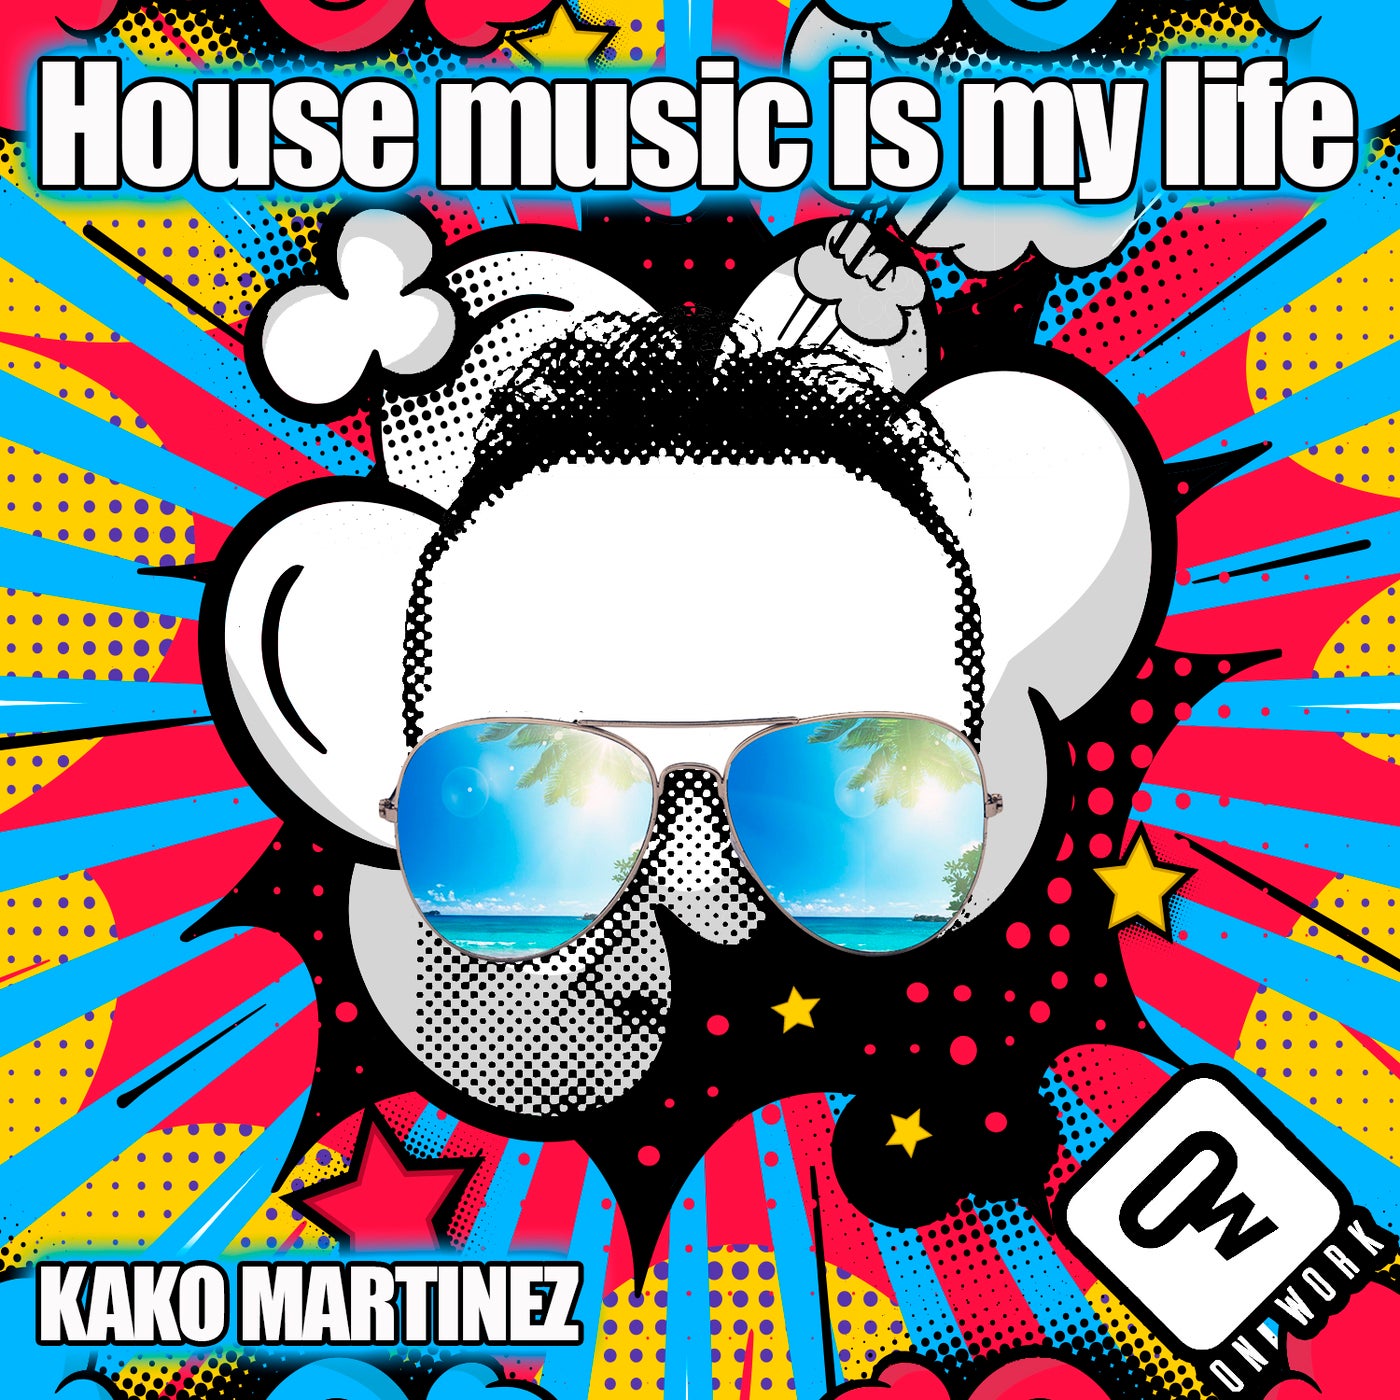 House music is my life